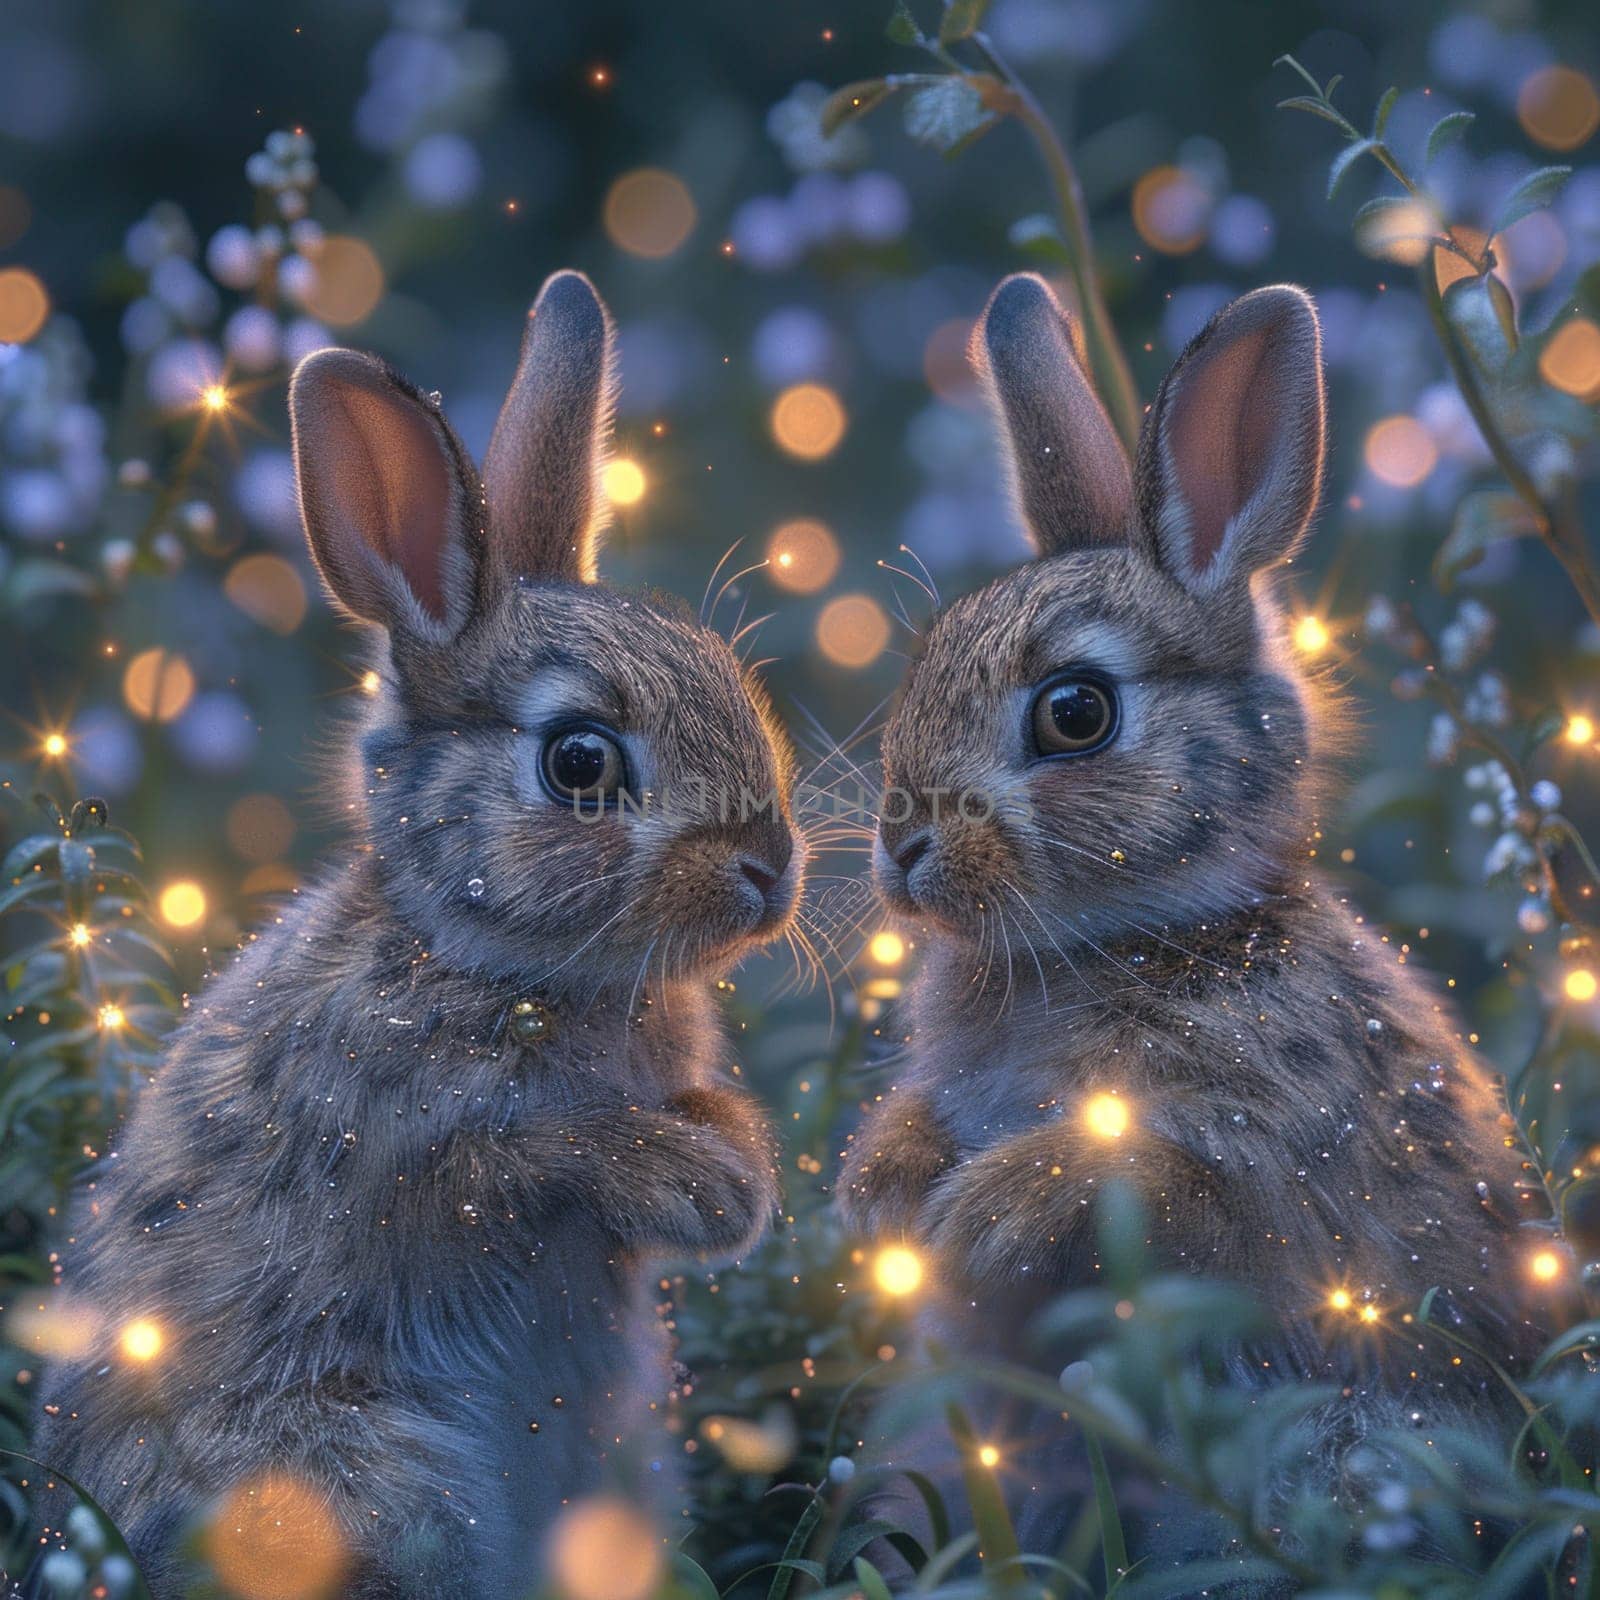 Two Rabbits Sitting in a Field of Grass by but_photo